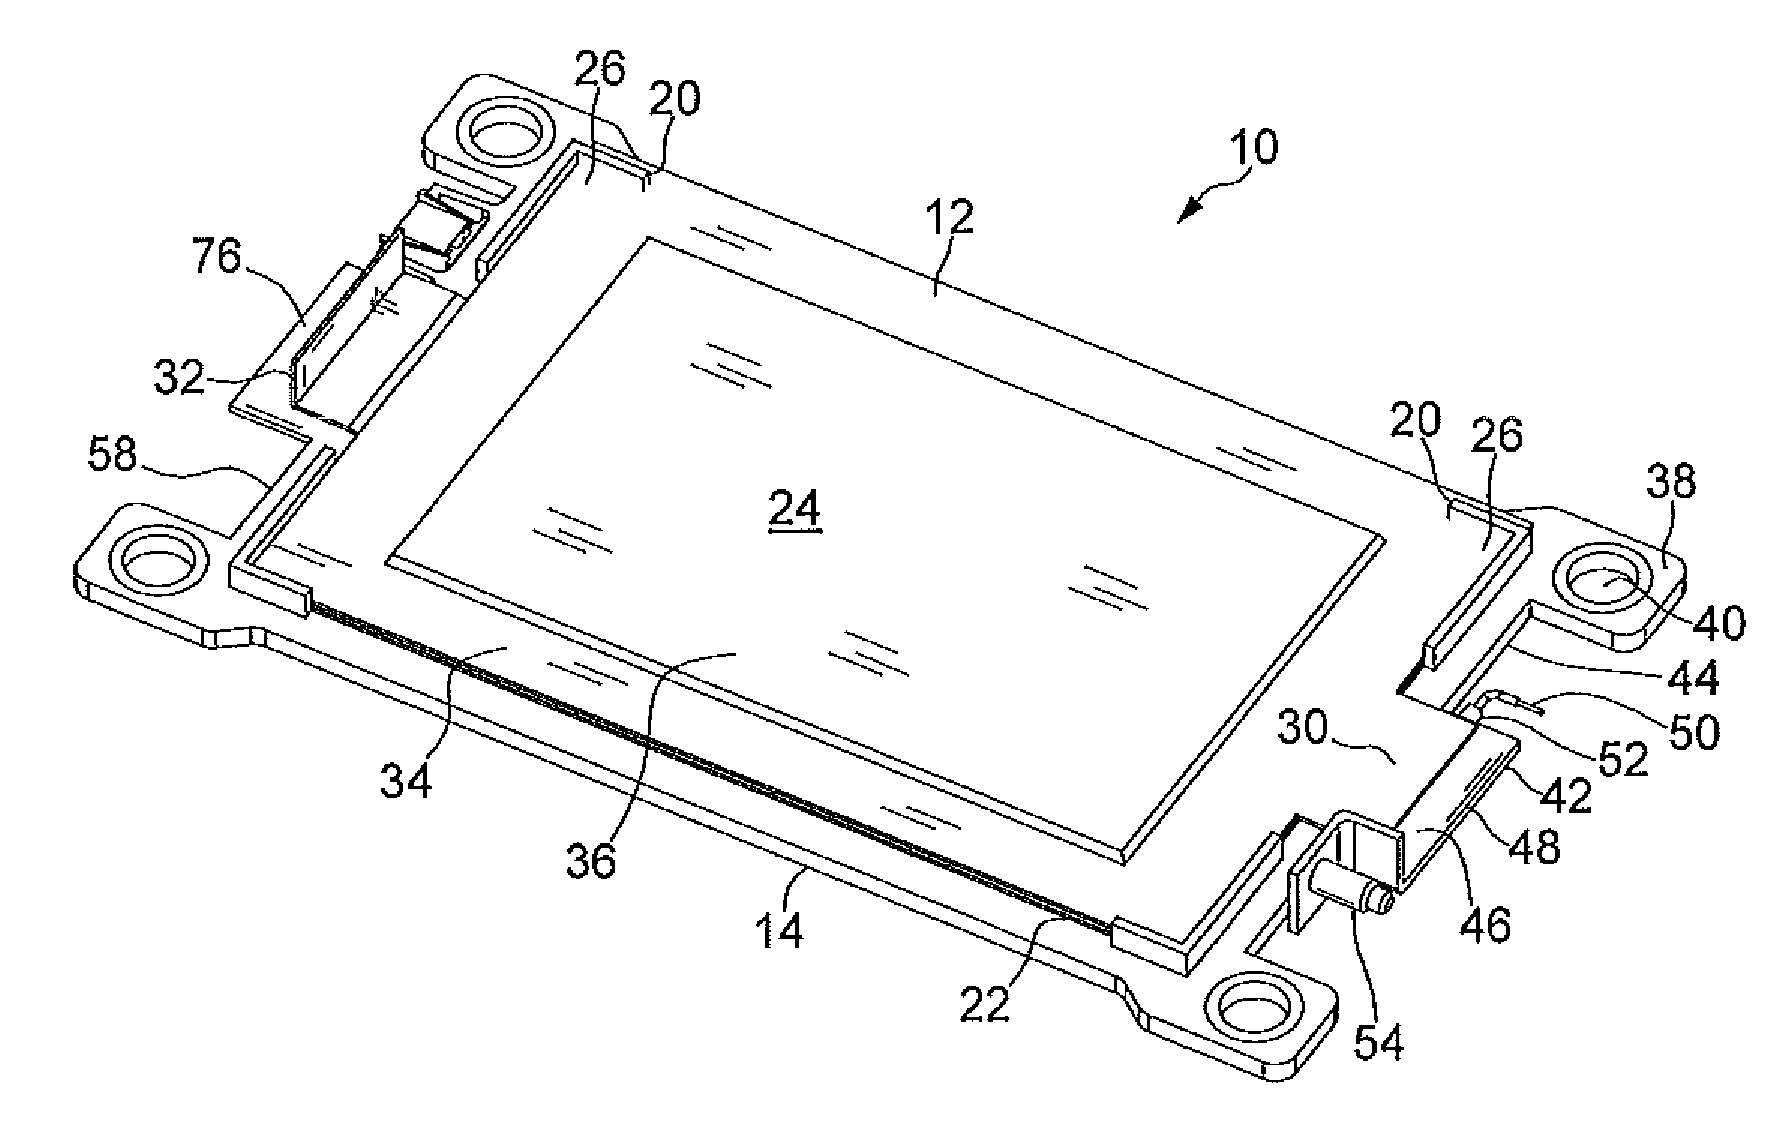 Stackable repeating frame with integrated cell sensing connection